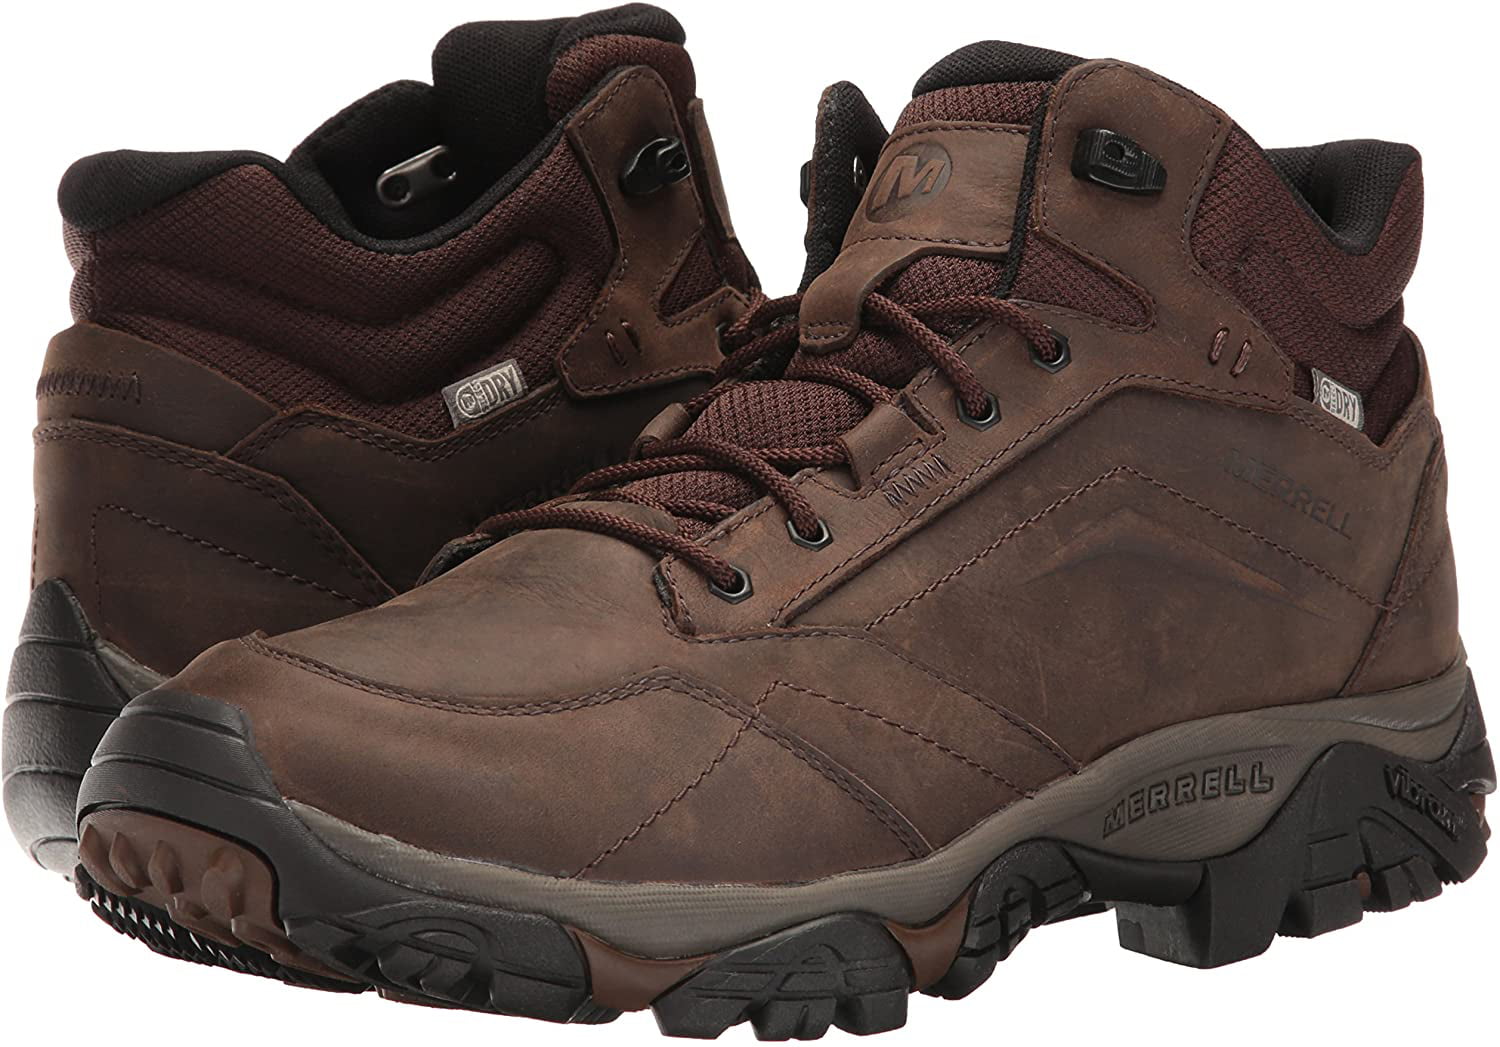 MERRELL Moab Adventure Mid J91819 Waterproof Outdoor Athletic Shoes Boots Mens 